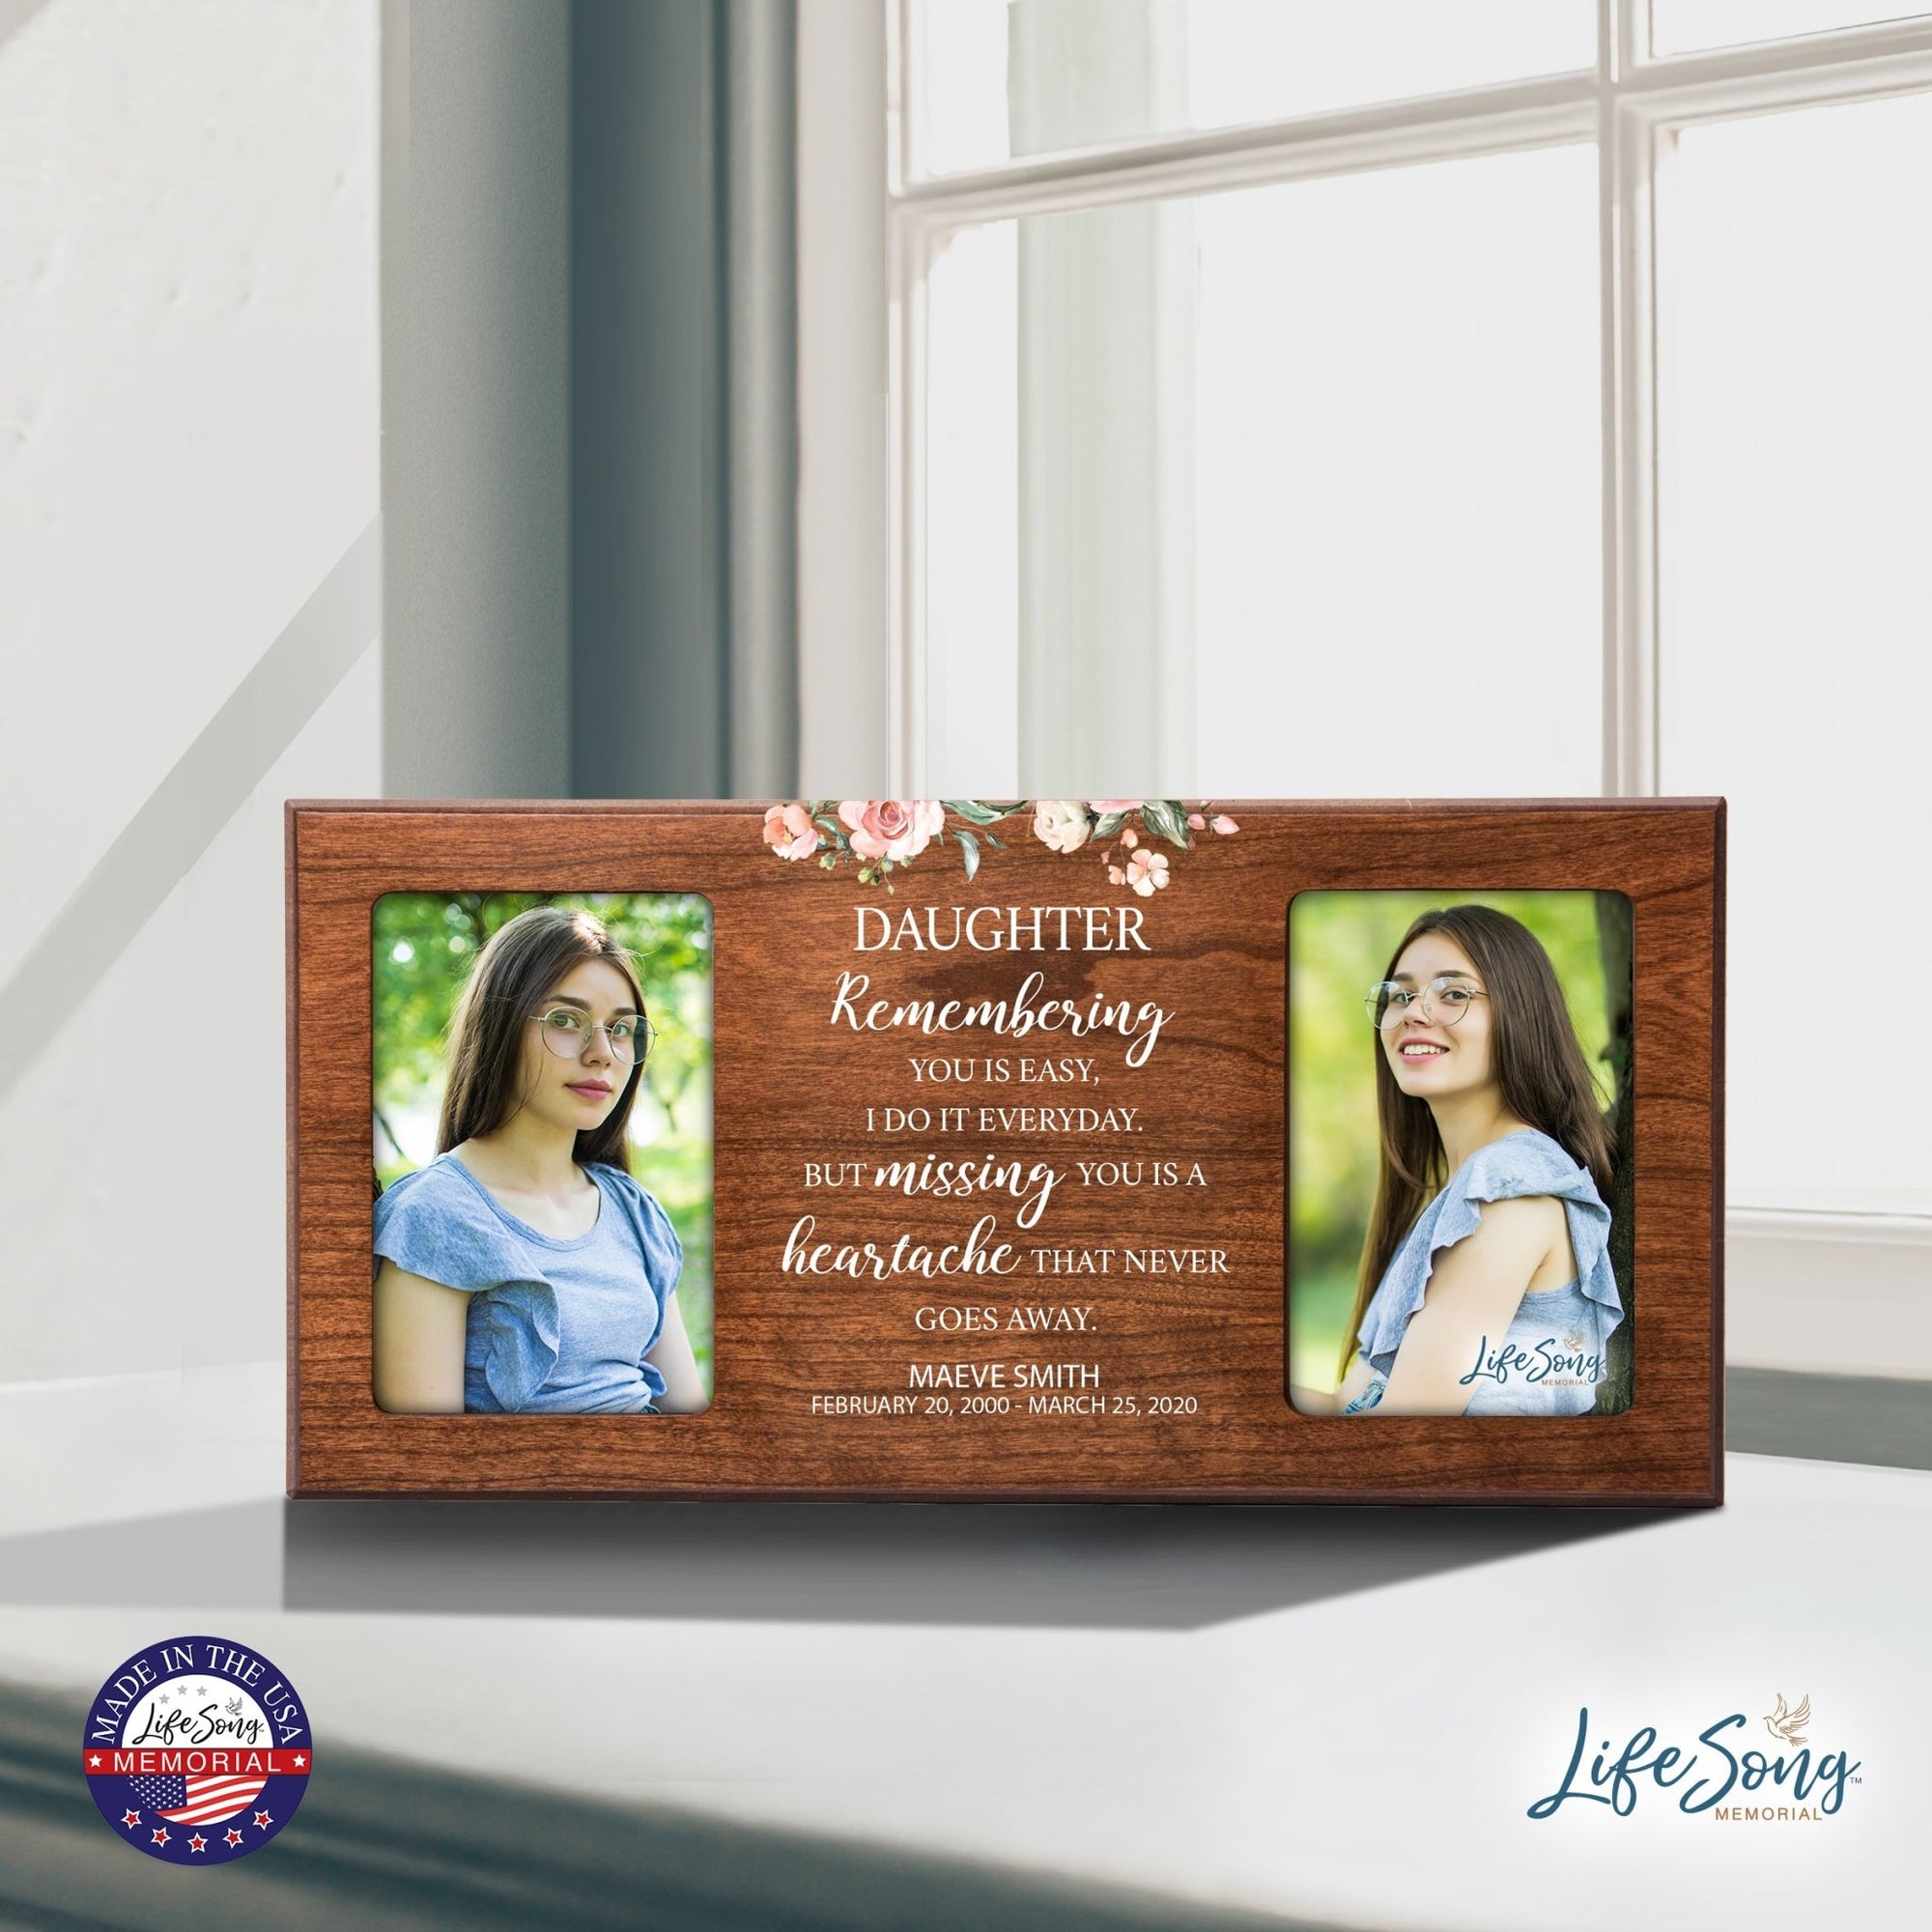 Custom Memorial Picture Frame 16x8in Holds Two 4x6in Photos - Daughter, Remembering You Is Easy - LifeSong Milestones